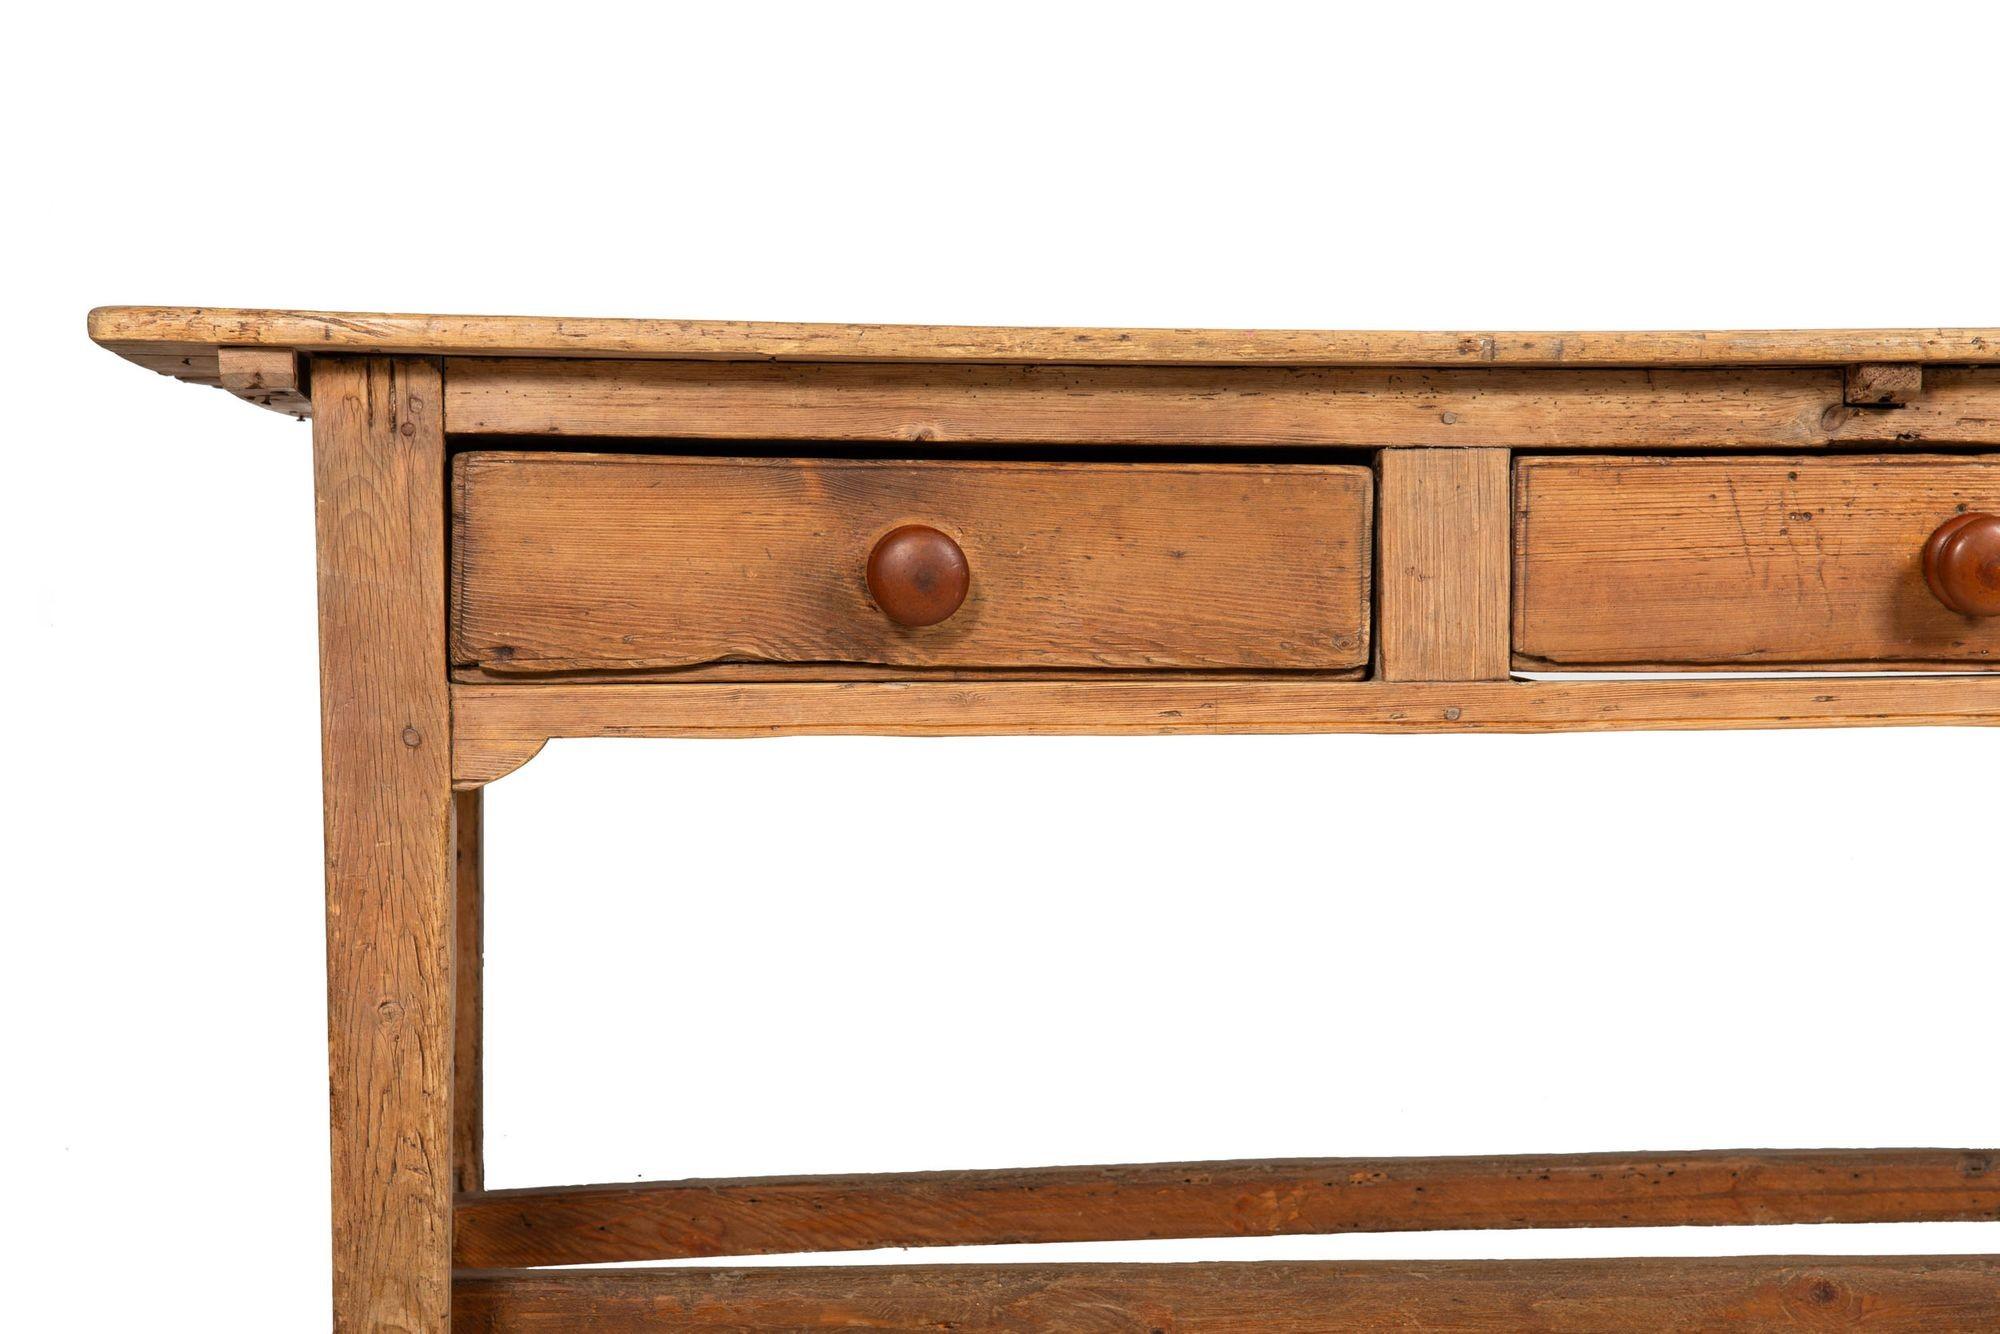 Worn and Patinated English Antique Pine Tavern Table Desk For Sale 1